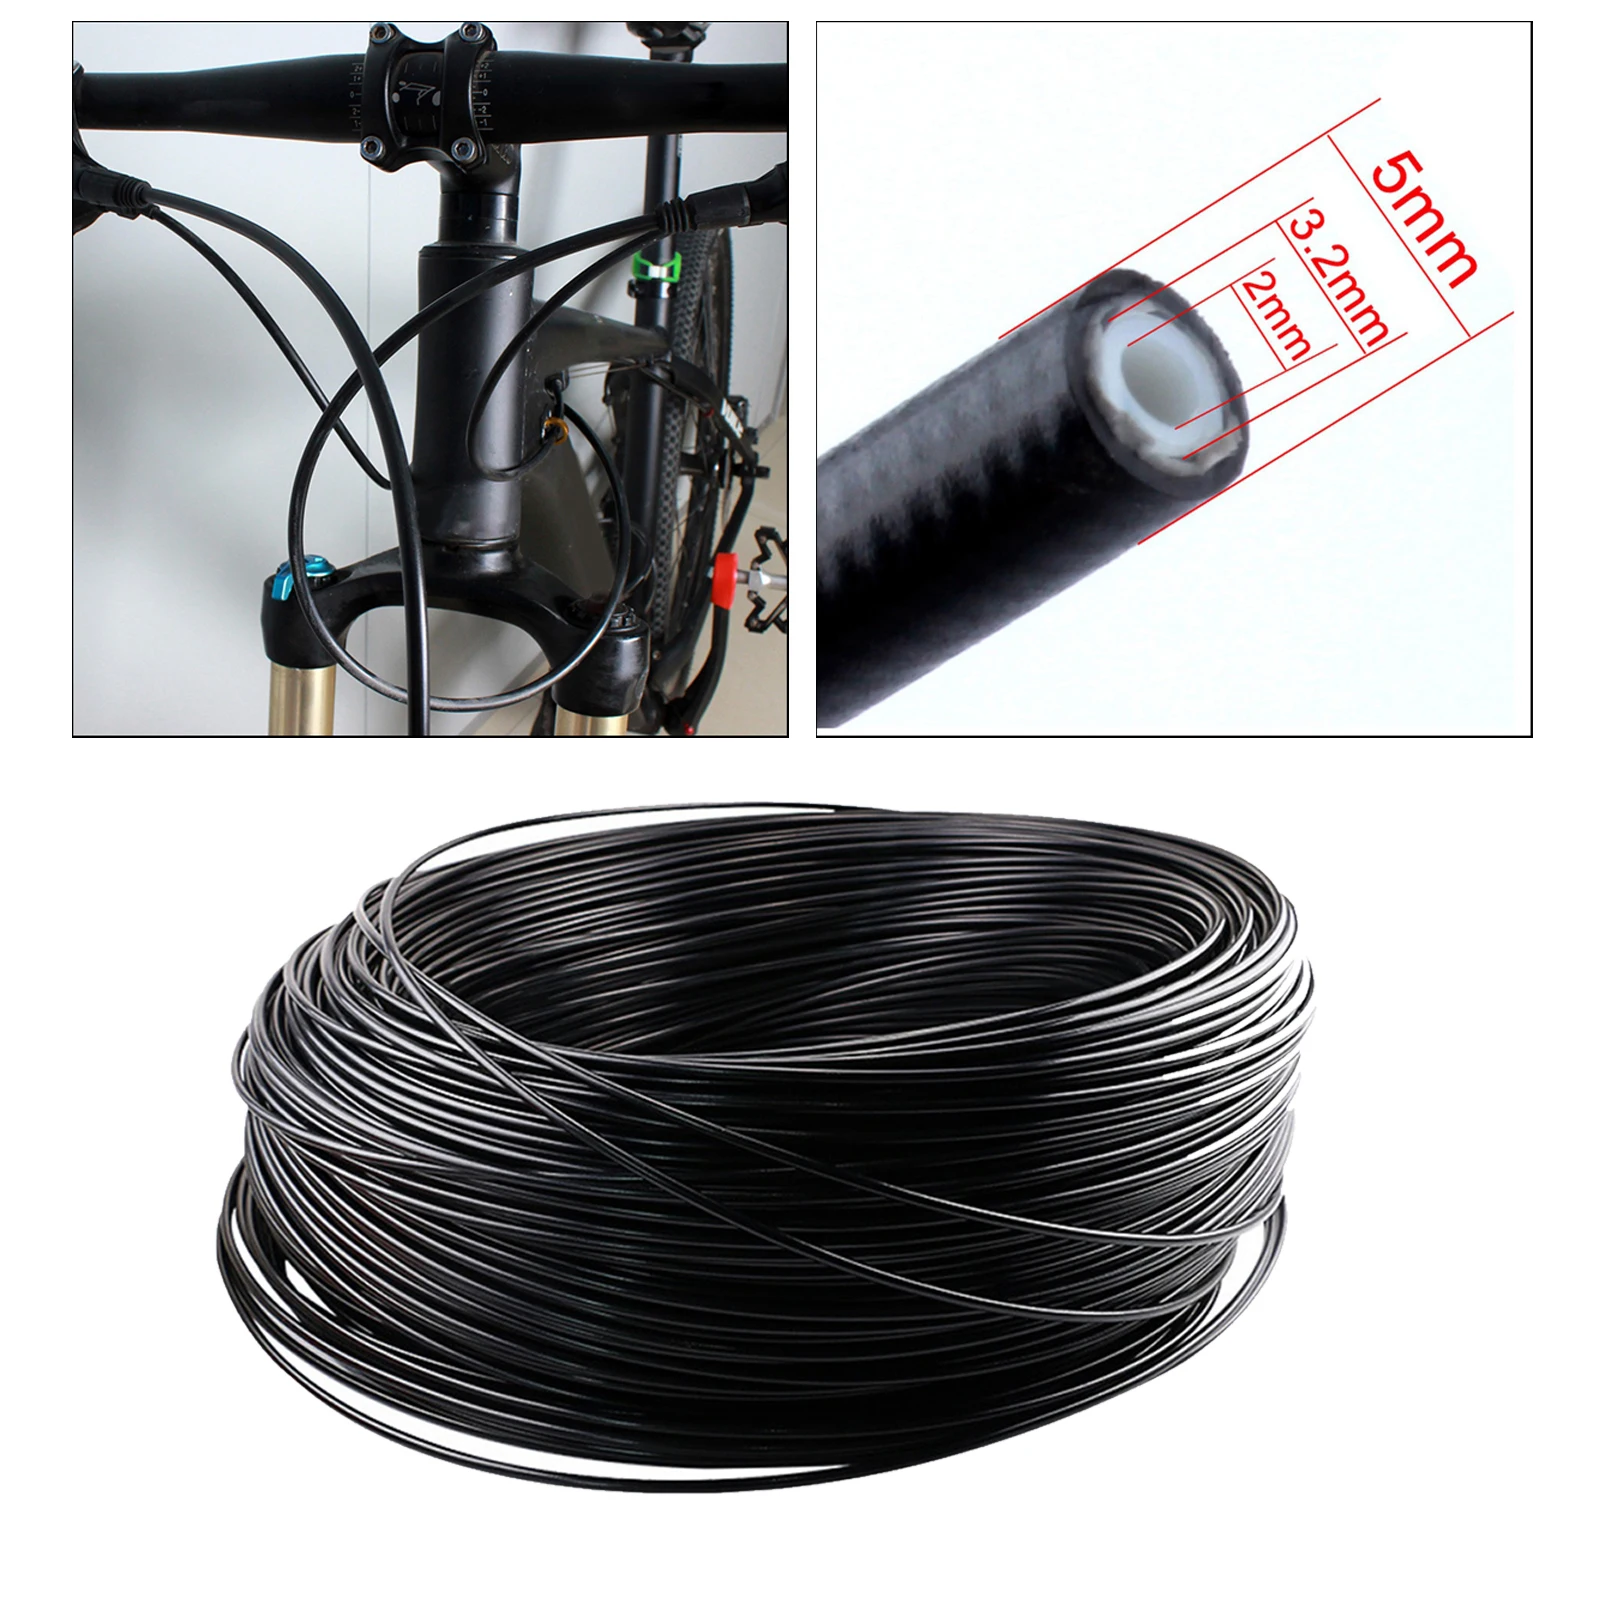 10000PSI 5M Bike Hydraulic Brake Hose MTB Bike Bicycle Hydraulic Disc Brake Oil Tube Pipe Cable 2mmx5mm Replacement for Shimano